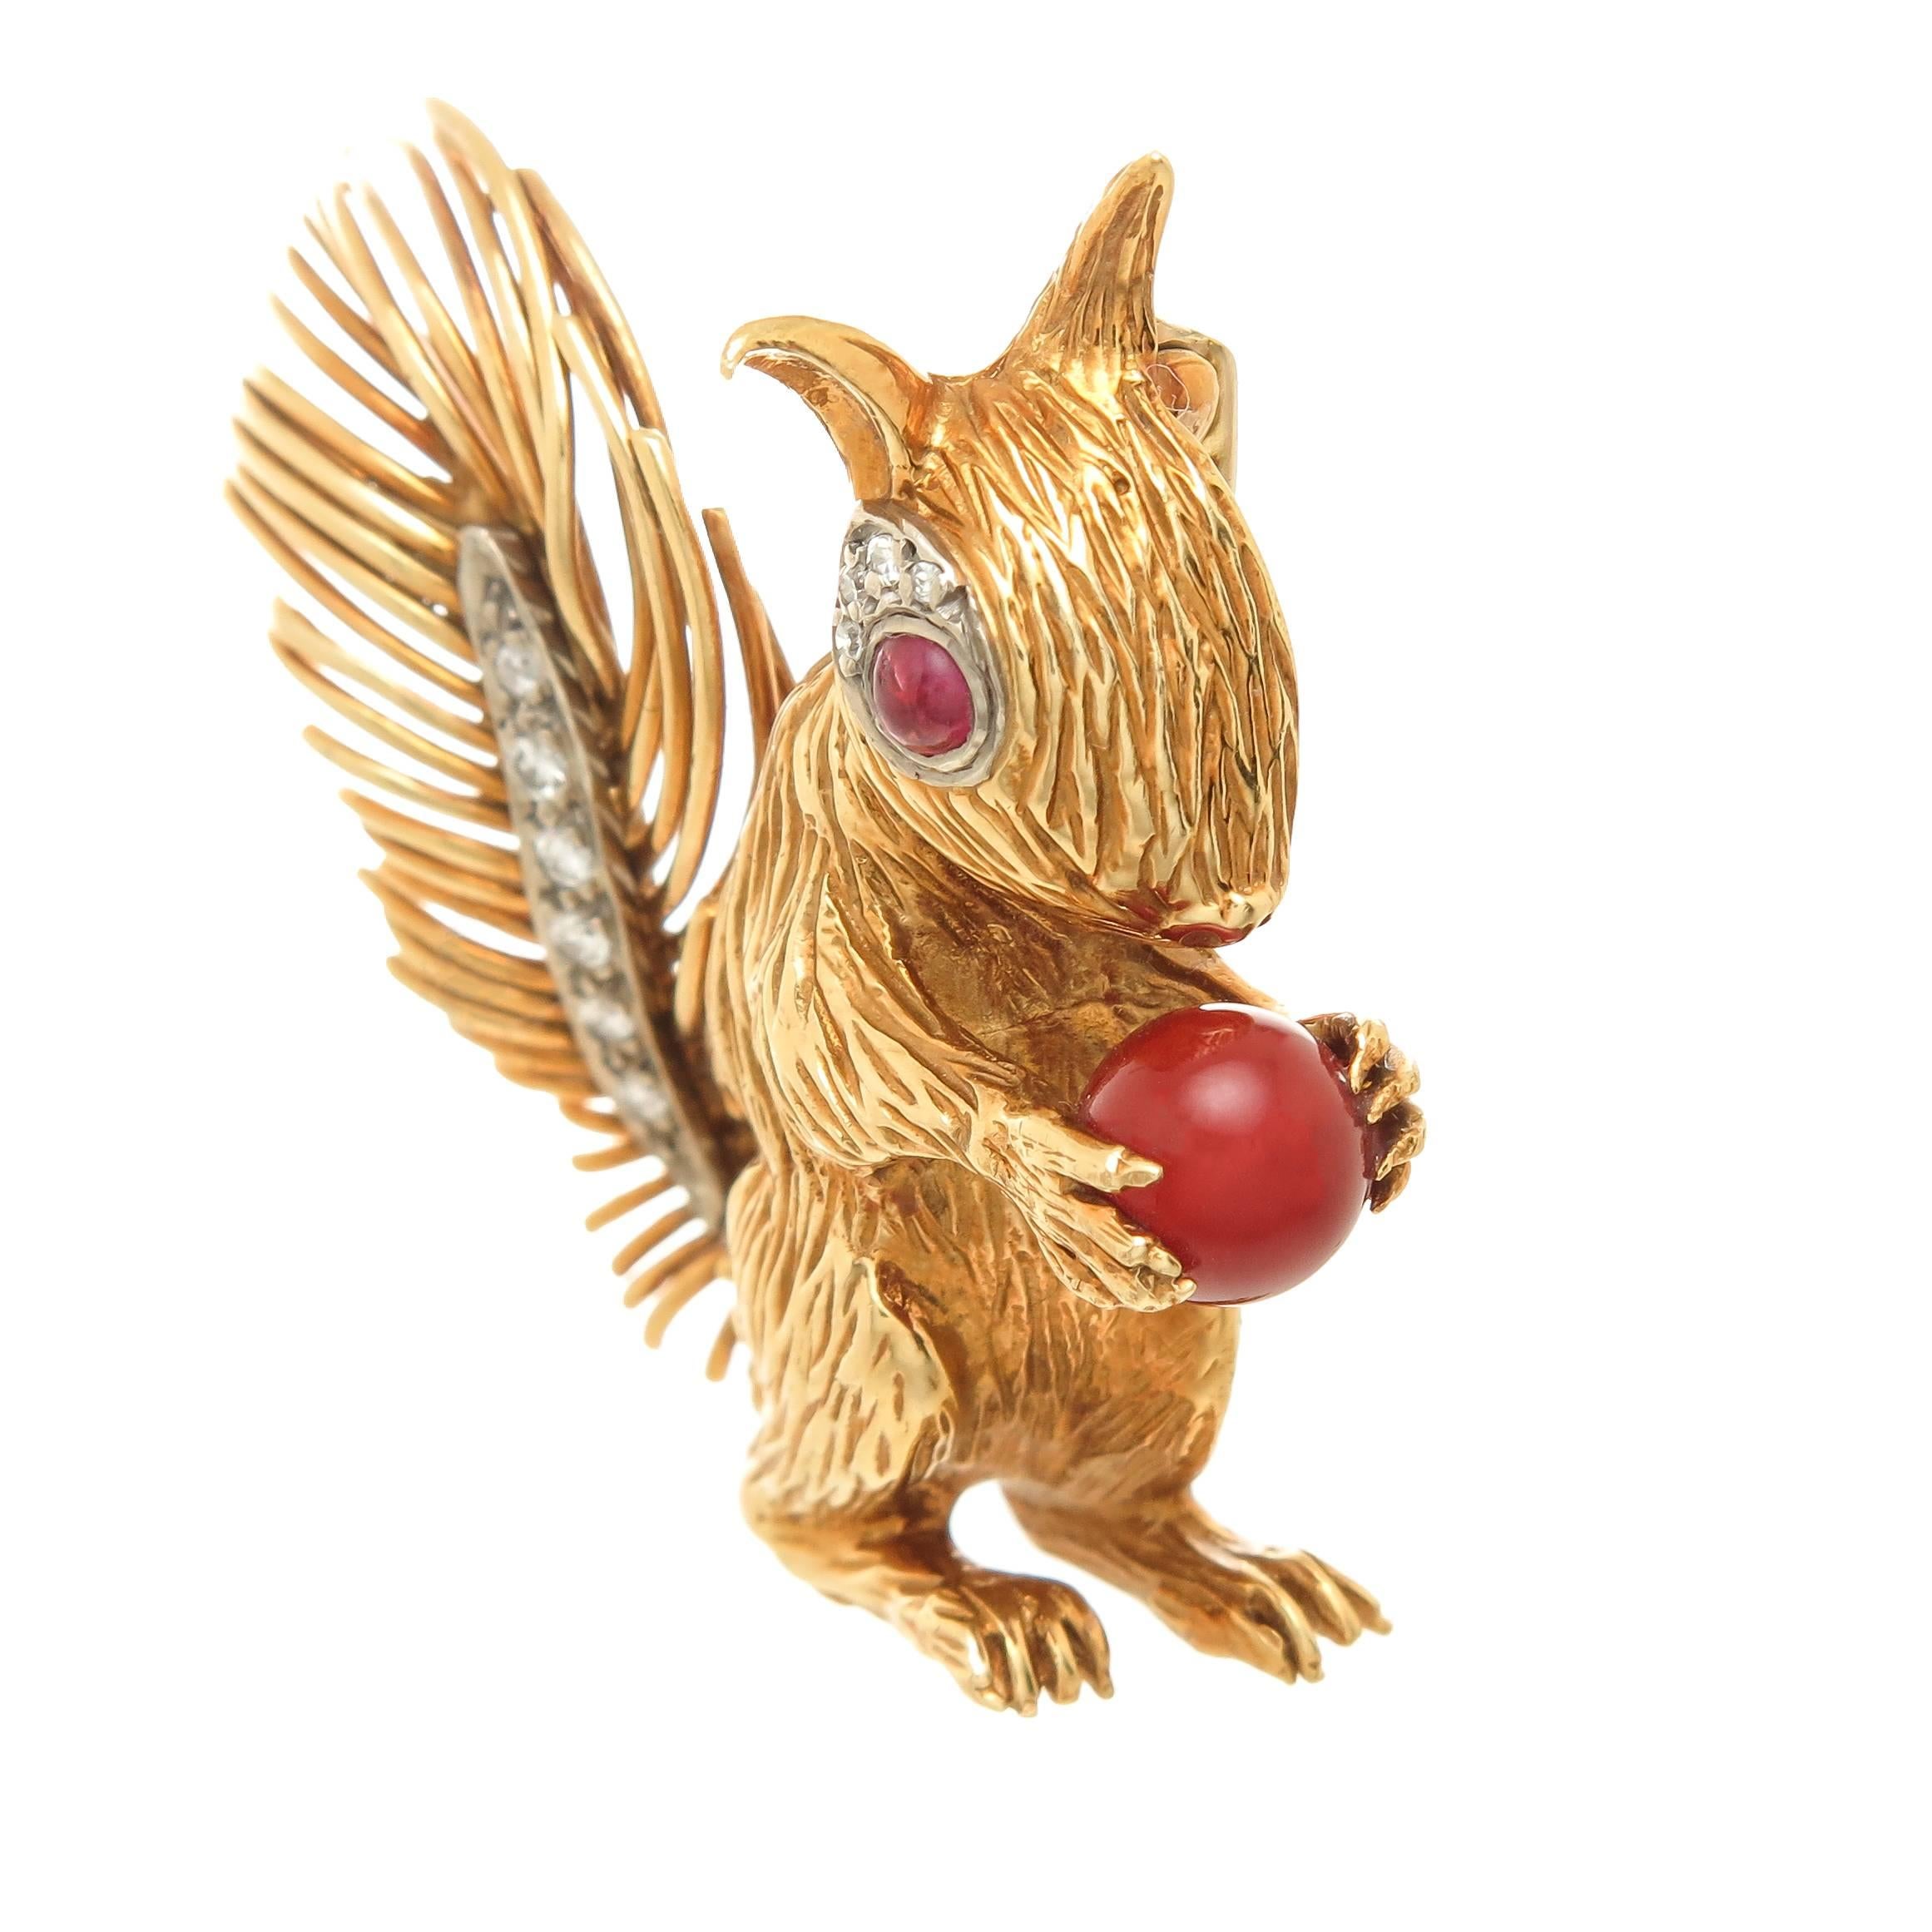 Circa 1980s Kutchinsky 18K Yellow Gold Squirrel Brooch, measuring 1 5/8 inch x 1 3/4 inch. very fine detailing, set with Diamonds, Rubies and a Chrysoprase. 